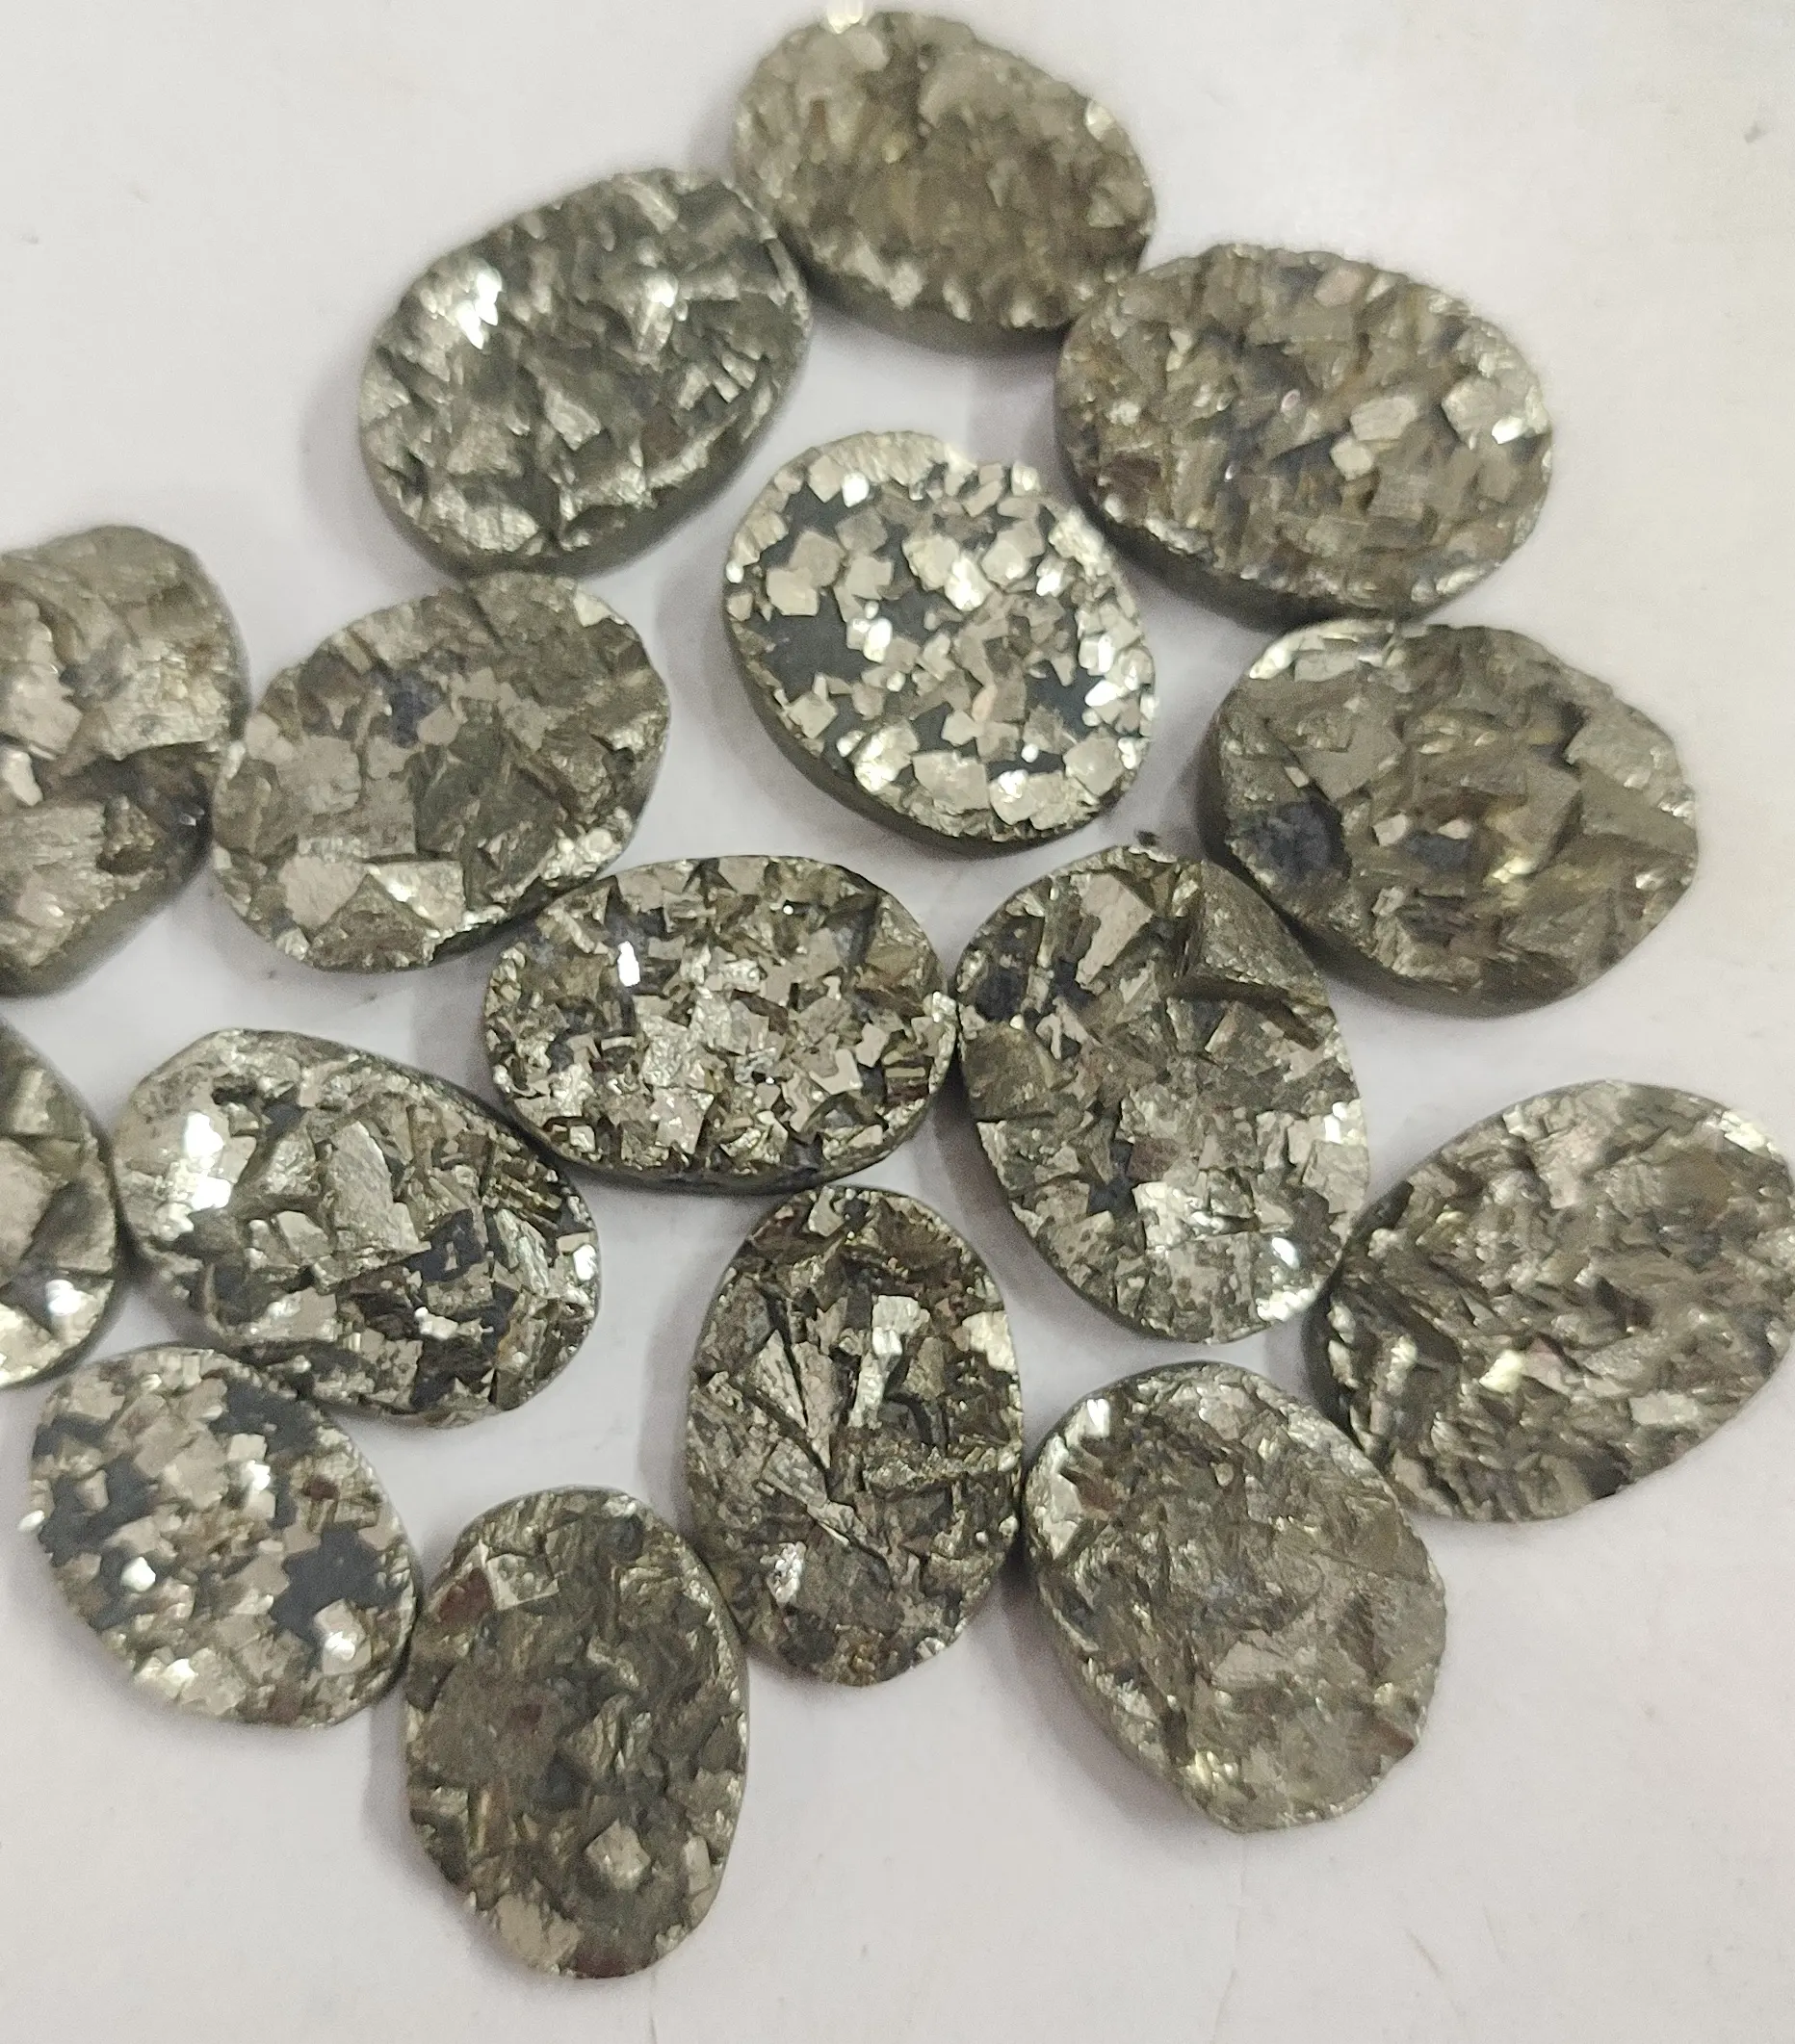 100% Natural pyrite druzy cabochon top quality pyrite druzy gemstone for Jewelry Making loose gemstone wholesaler